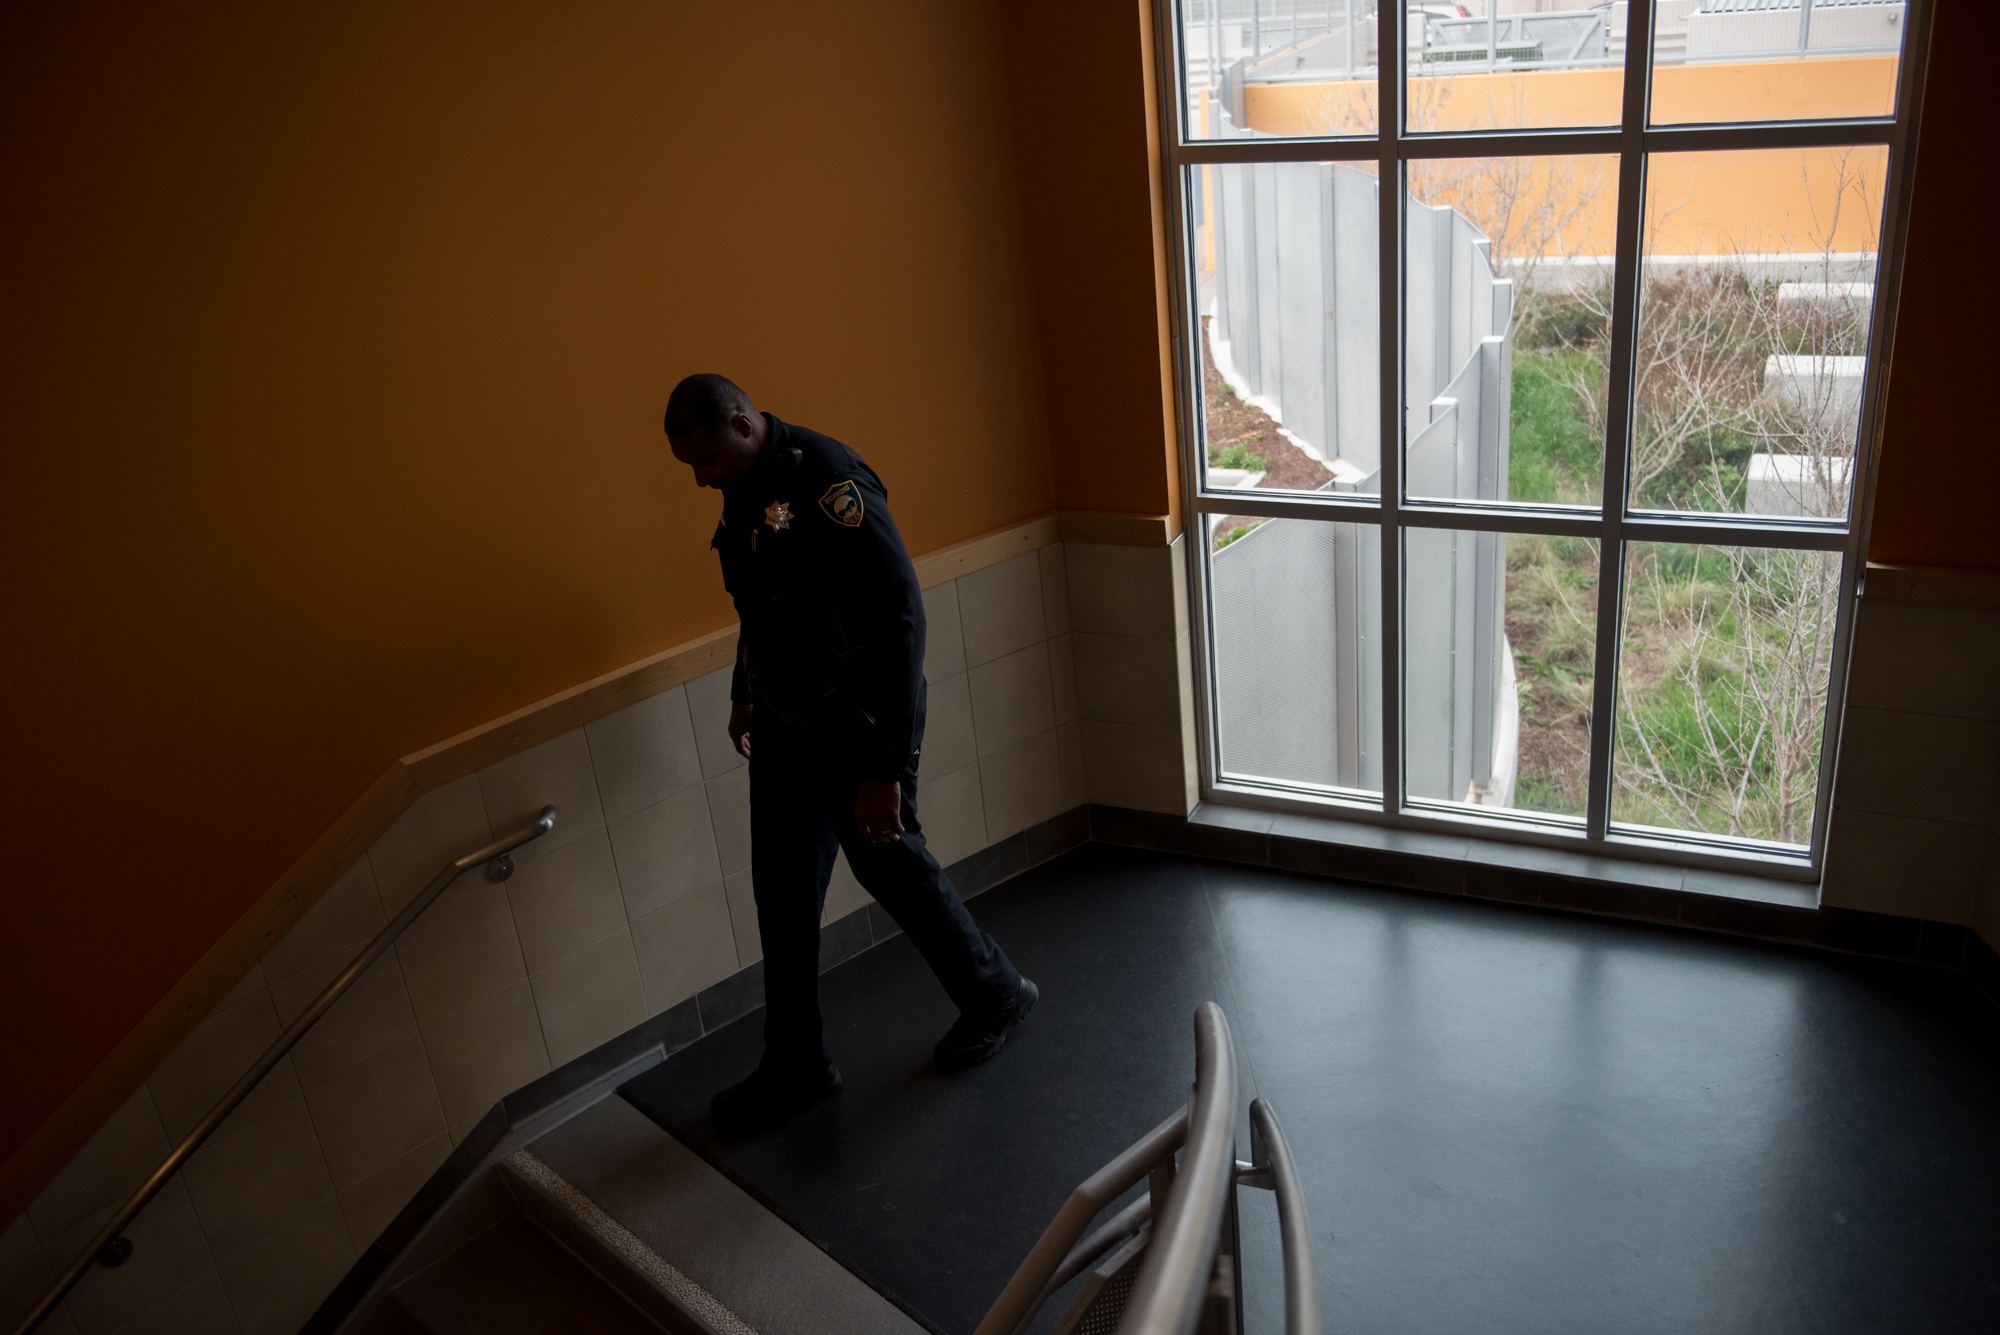  Officer Gary Lewis patrols the hallways at Sylvester Greenwood Academy on Friday, March 9 2018. | Rosa Furneaux, Special To The Chronicle 